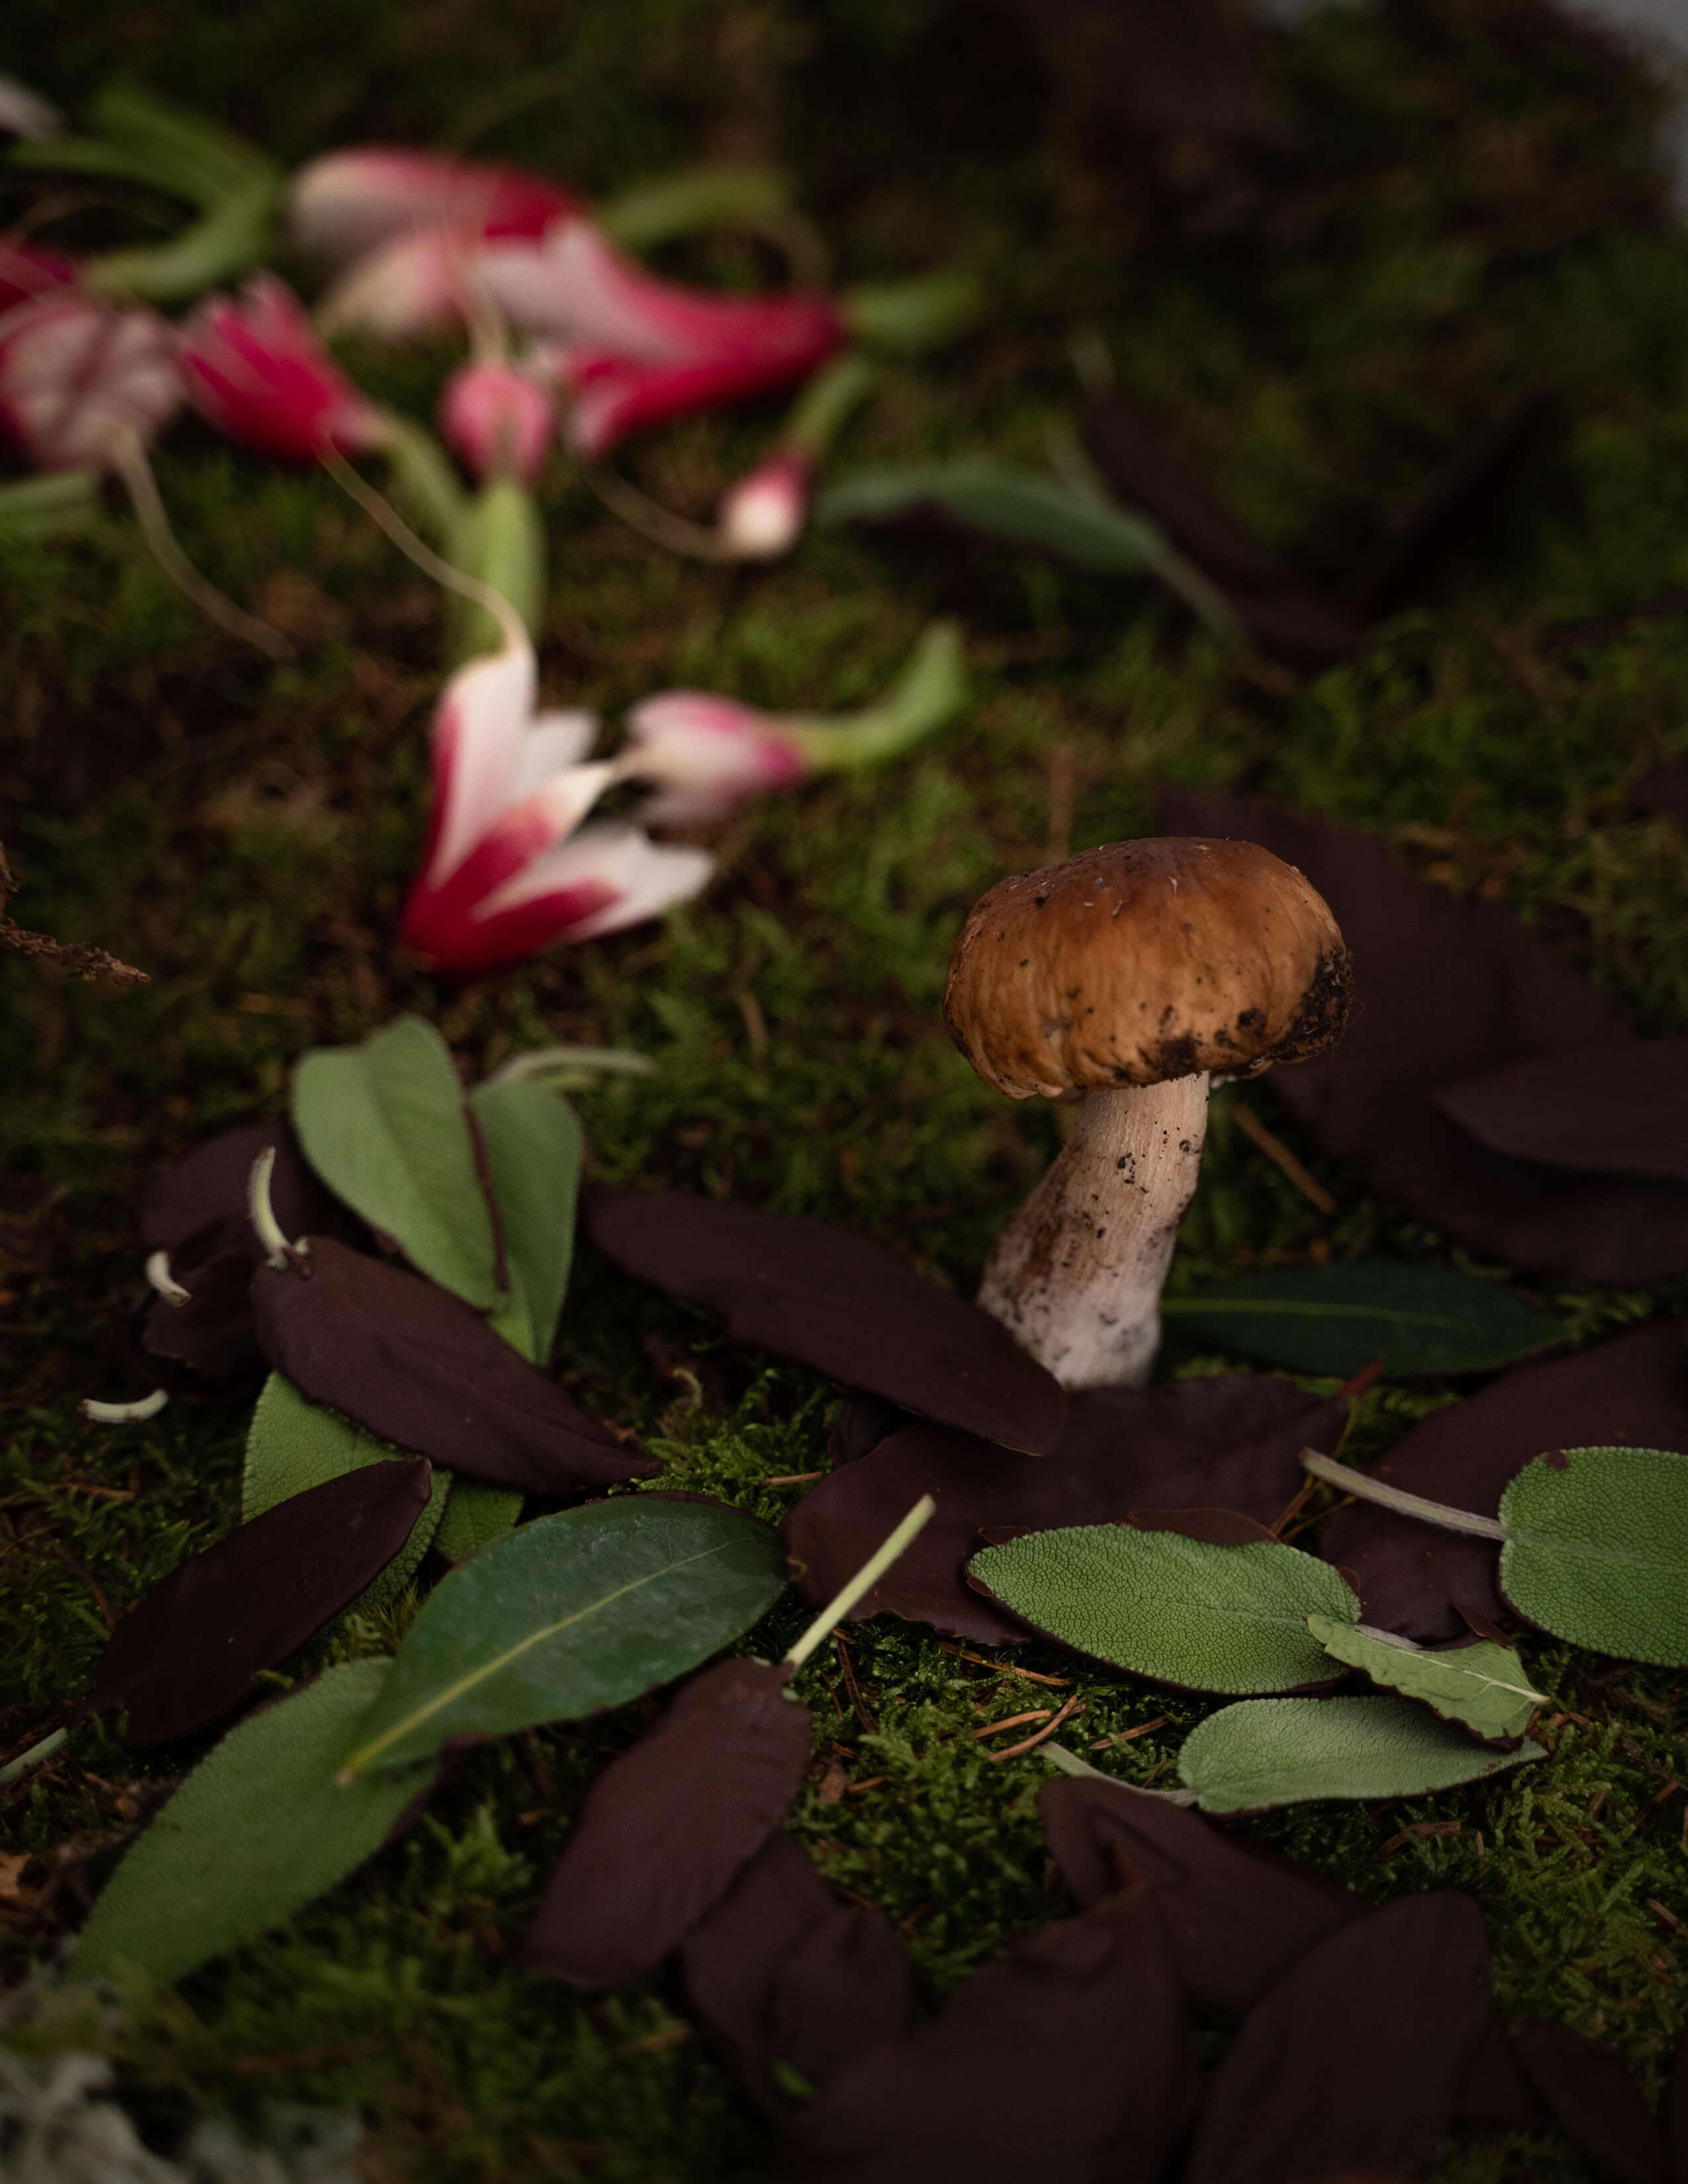 A mushroom stands out from a pile of different colours of leaves on the moss surface while there are some creative flower-like vegetable sculptures behind.